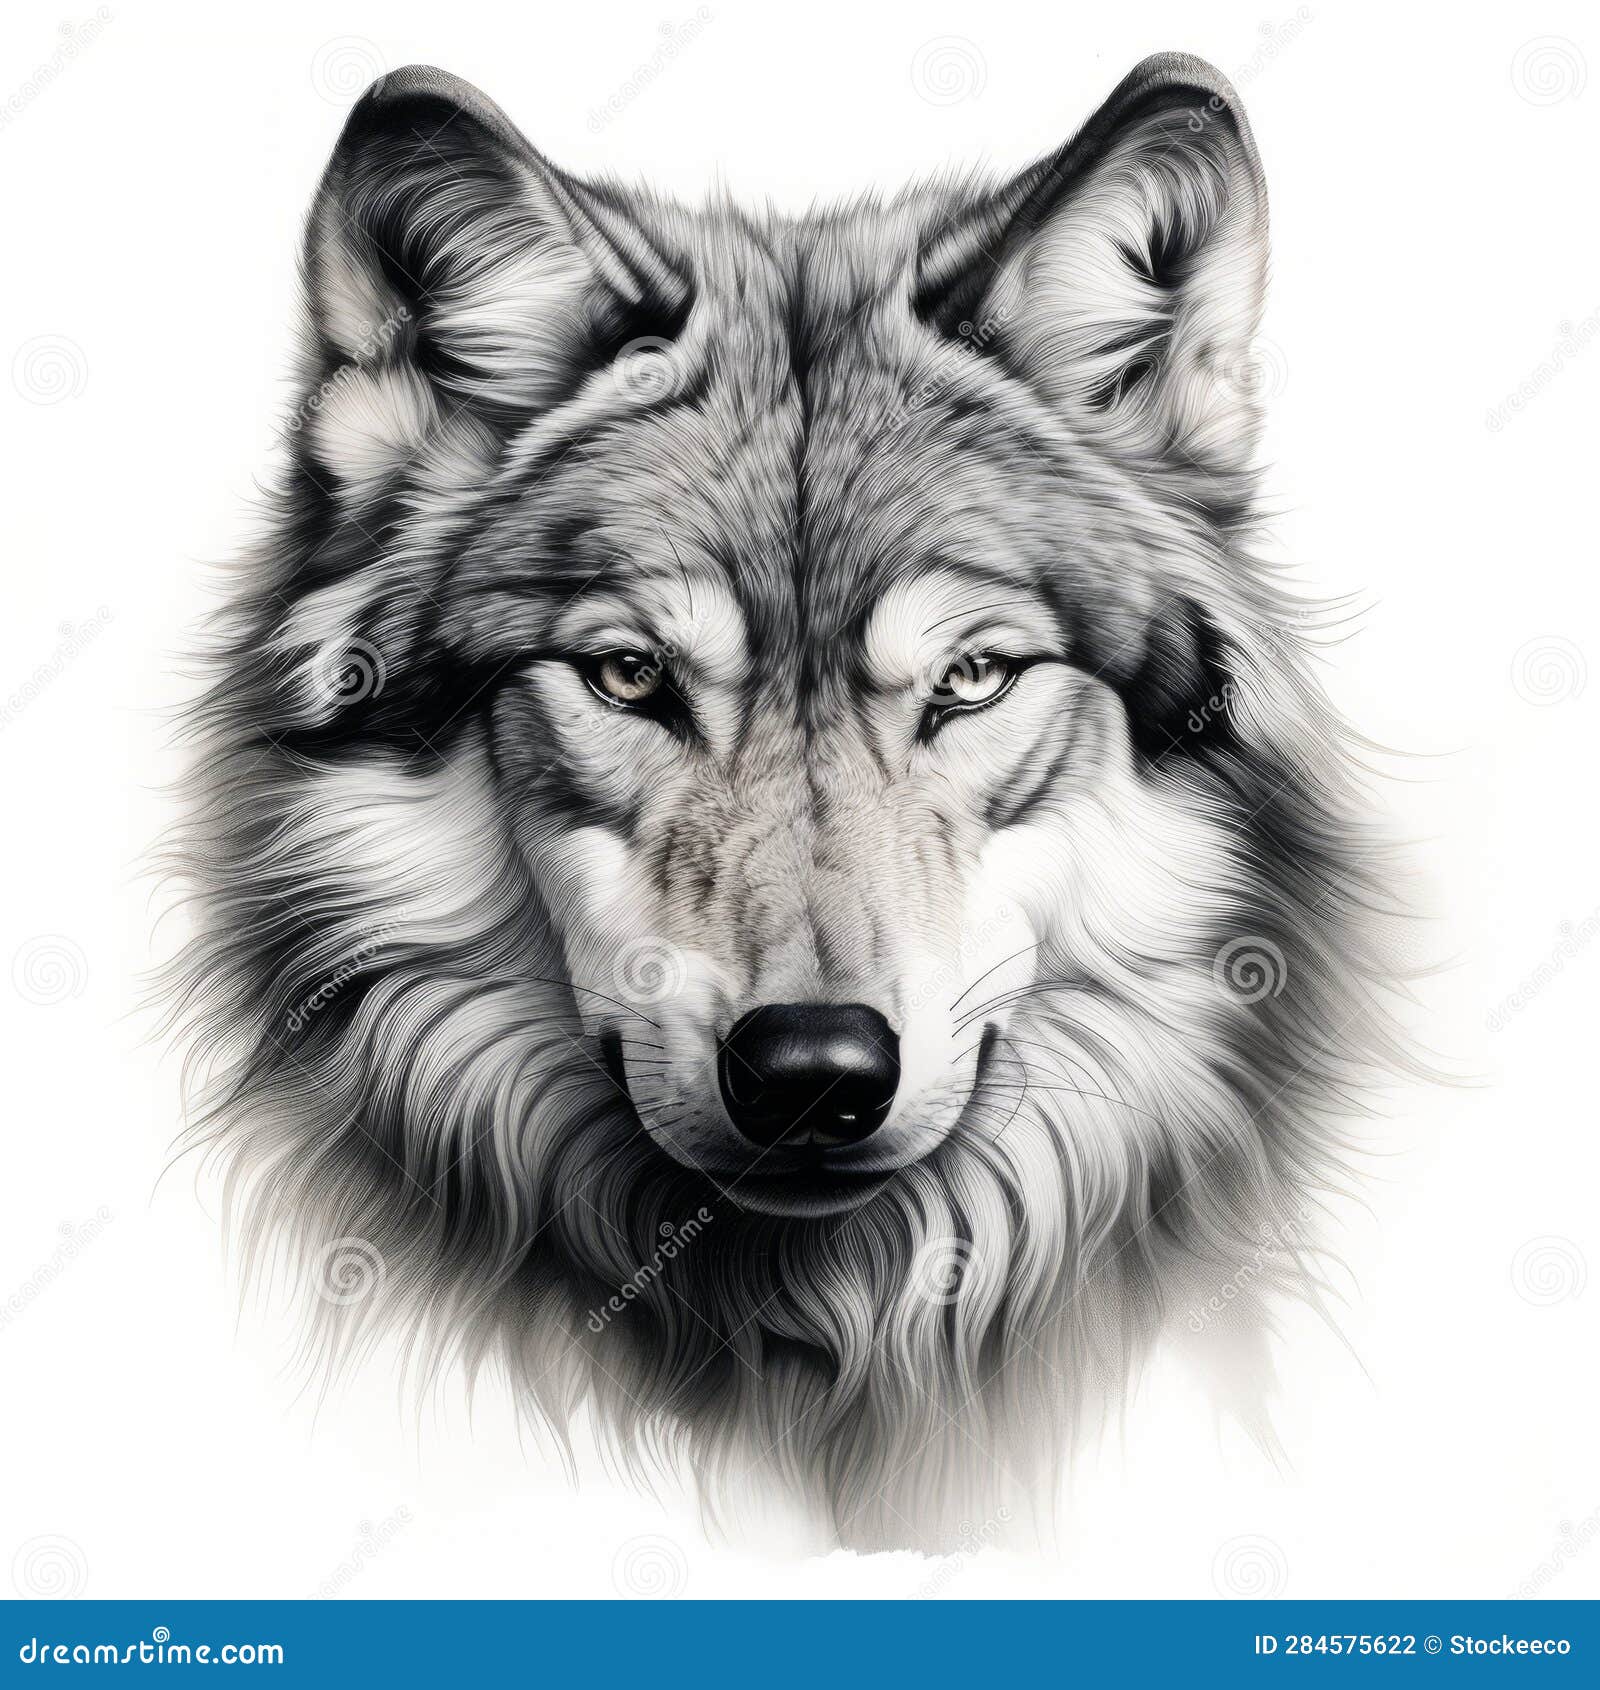 Wolf Head Drawing - Draw a Cunning Wolf Face Sketch